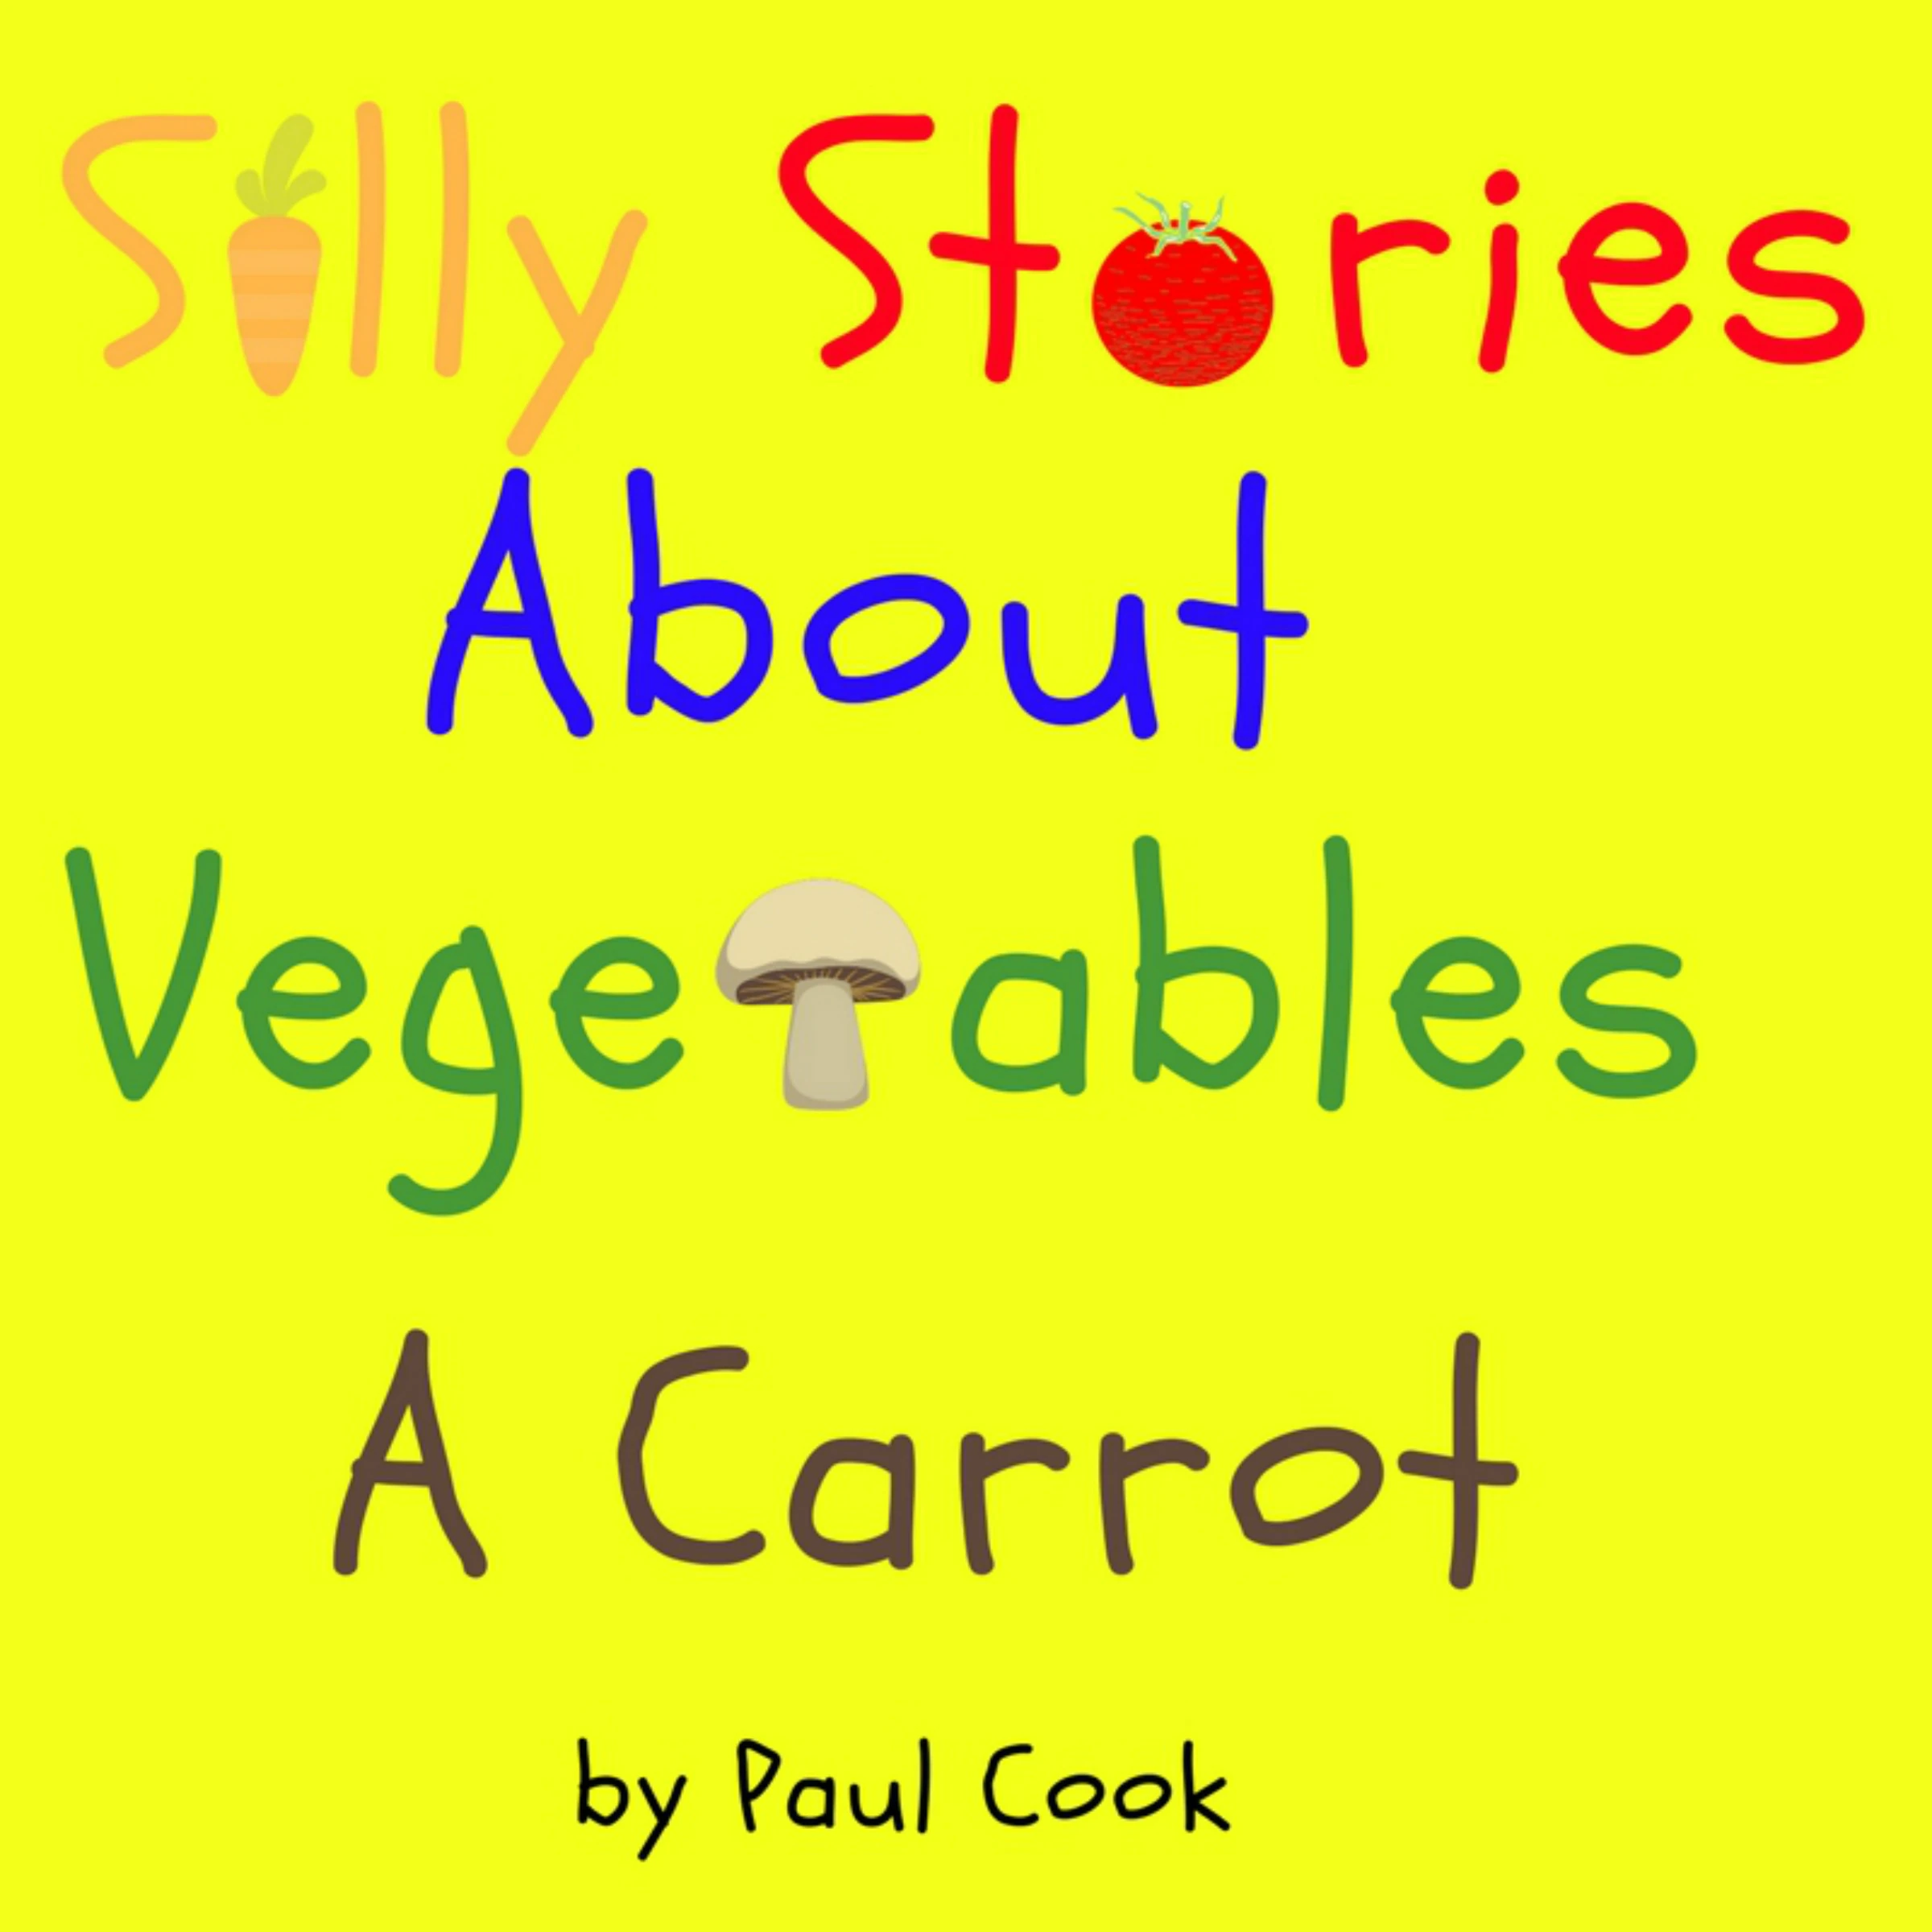 Silly Stories About Vegetables: A Carrot Audiobook by Paul Cook